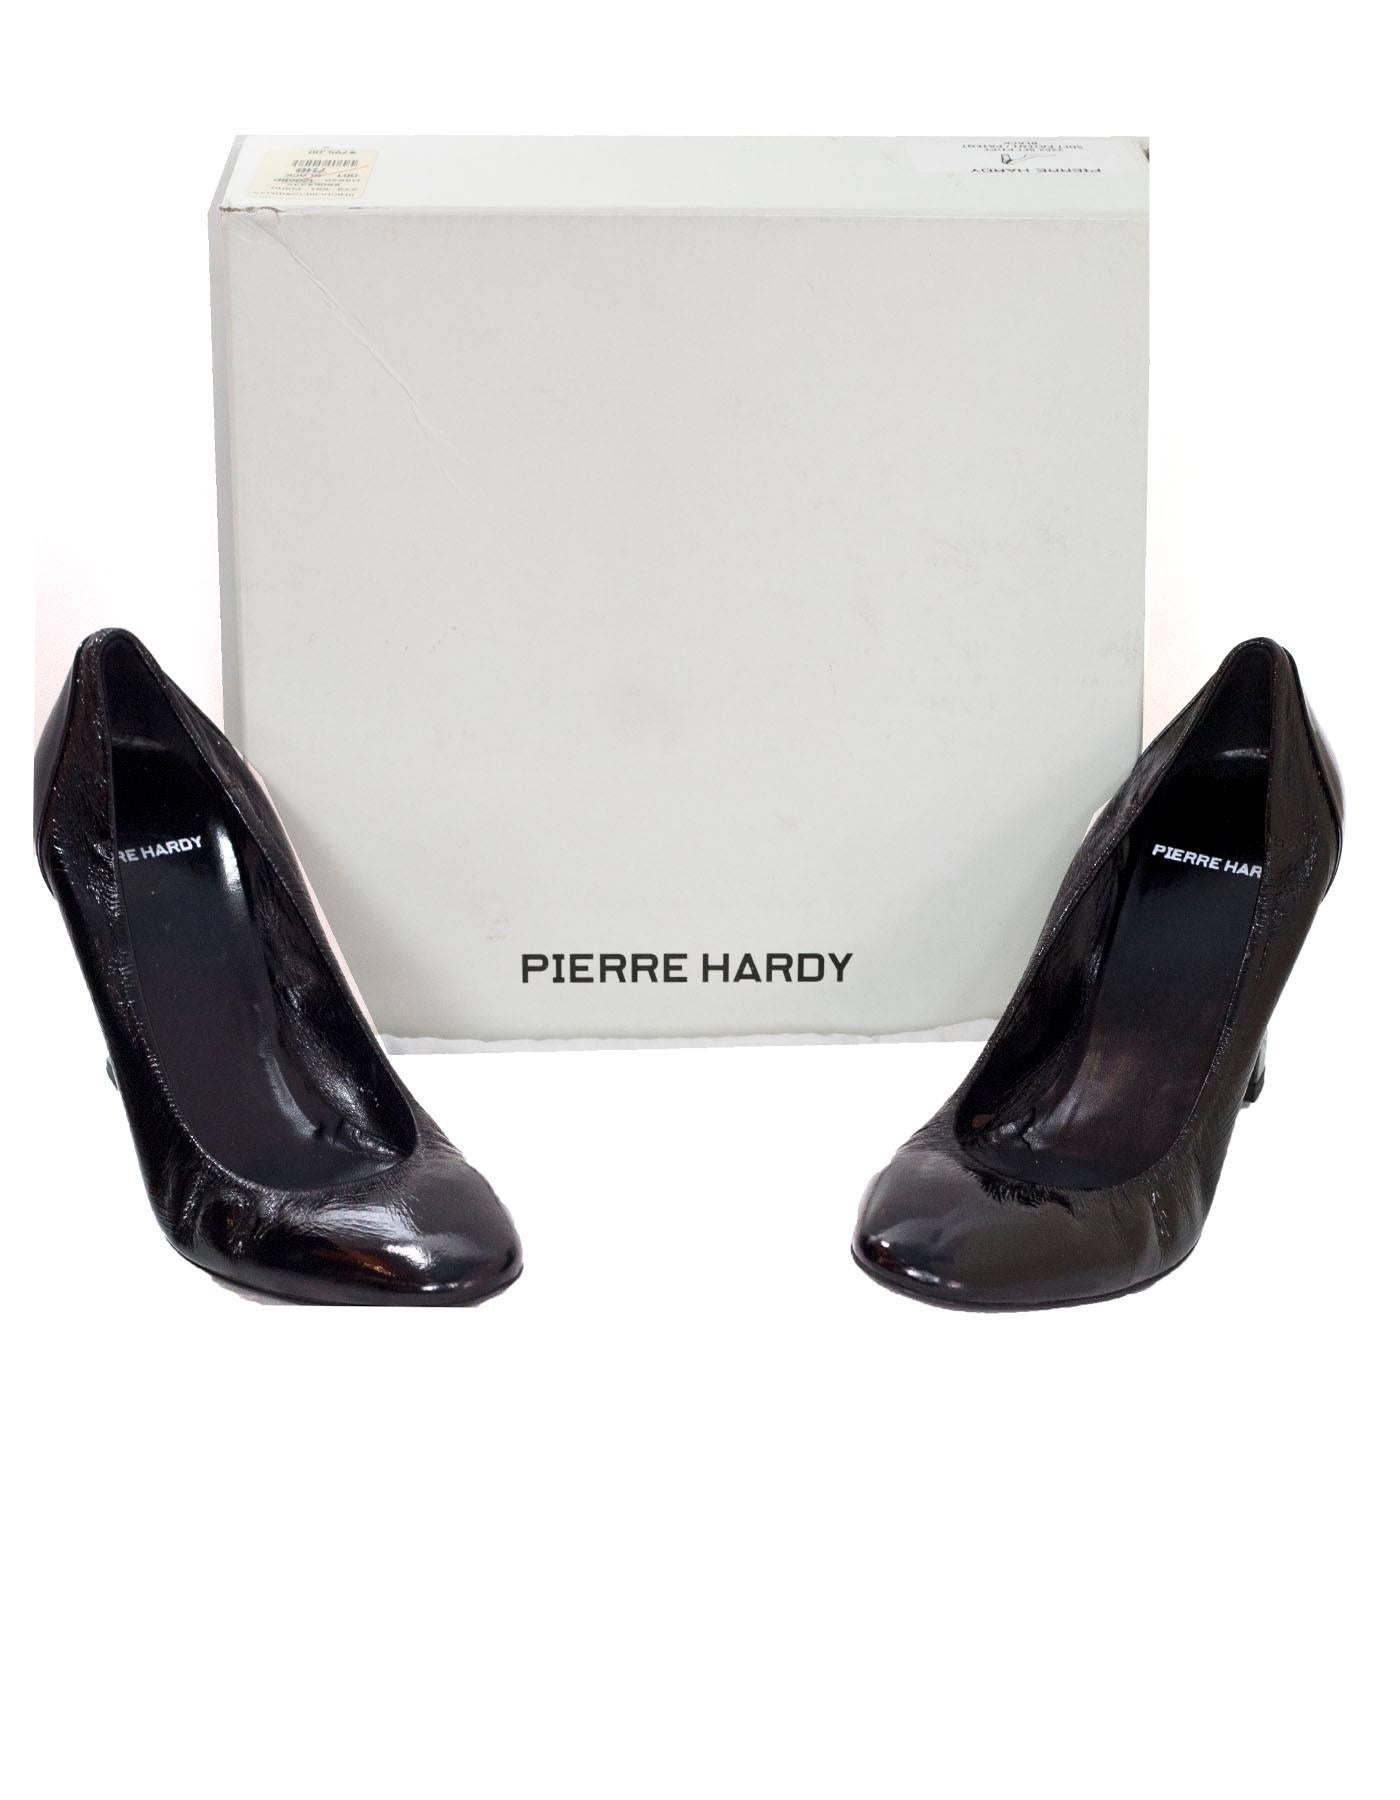 Pierre Hardy Black Patent Leather Pumps Sz 37.5 with Box 2